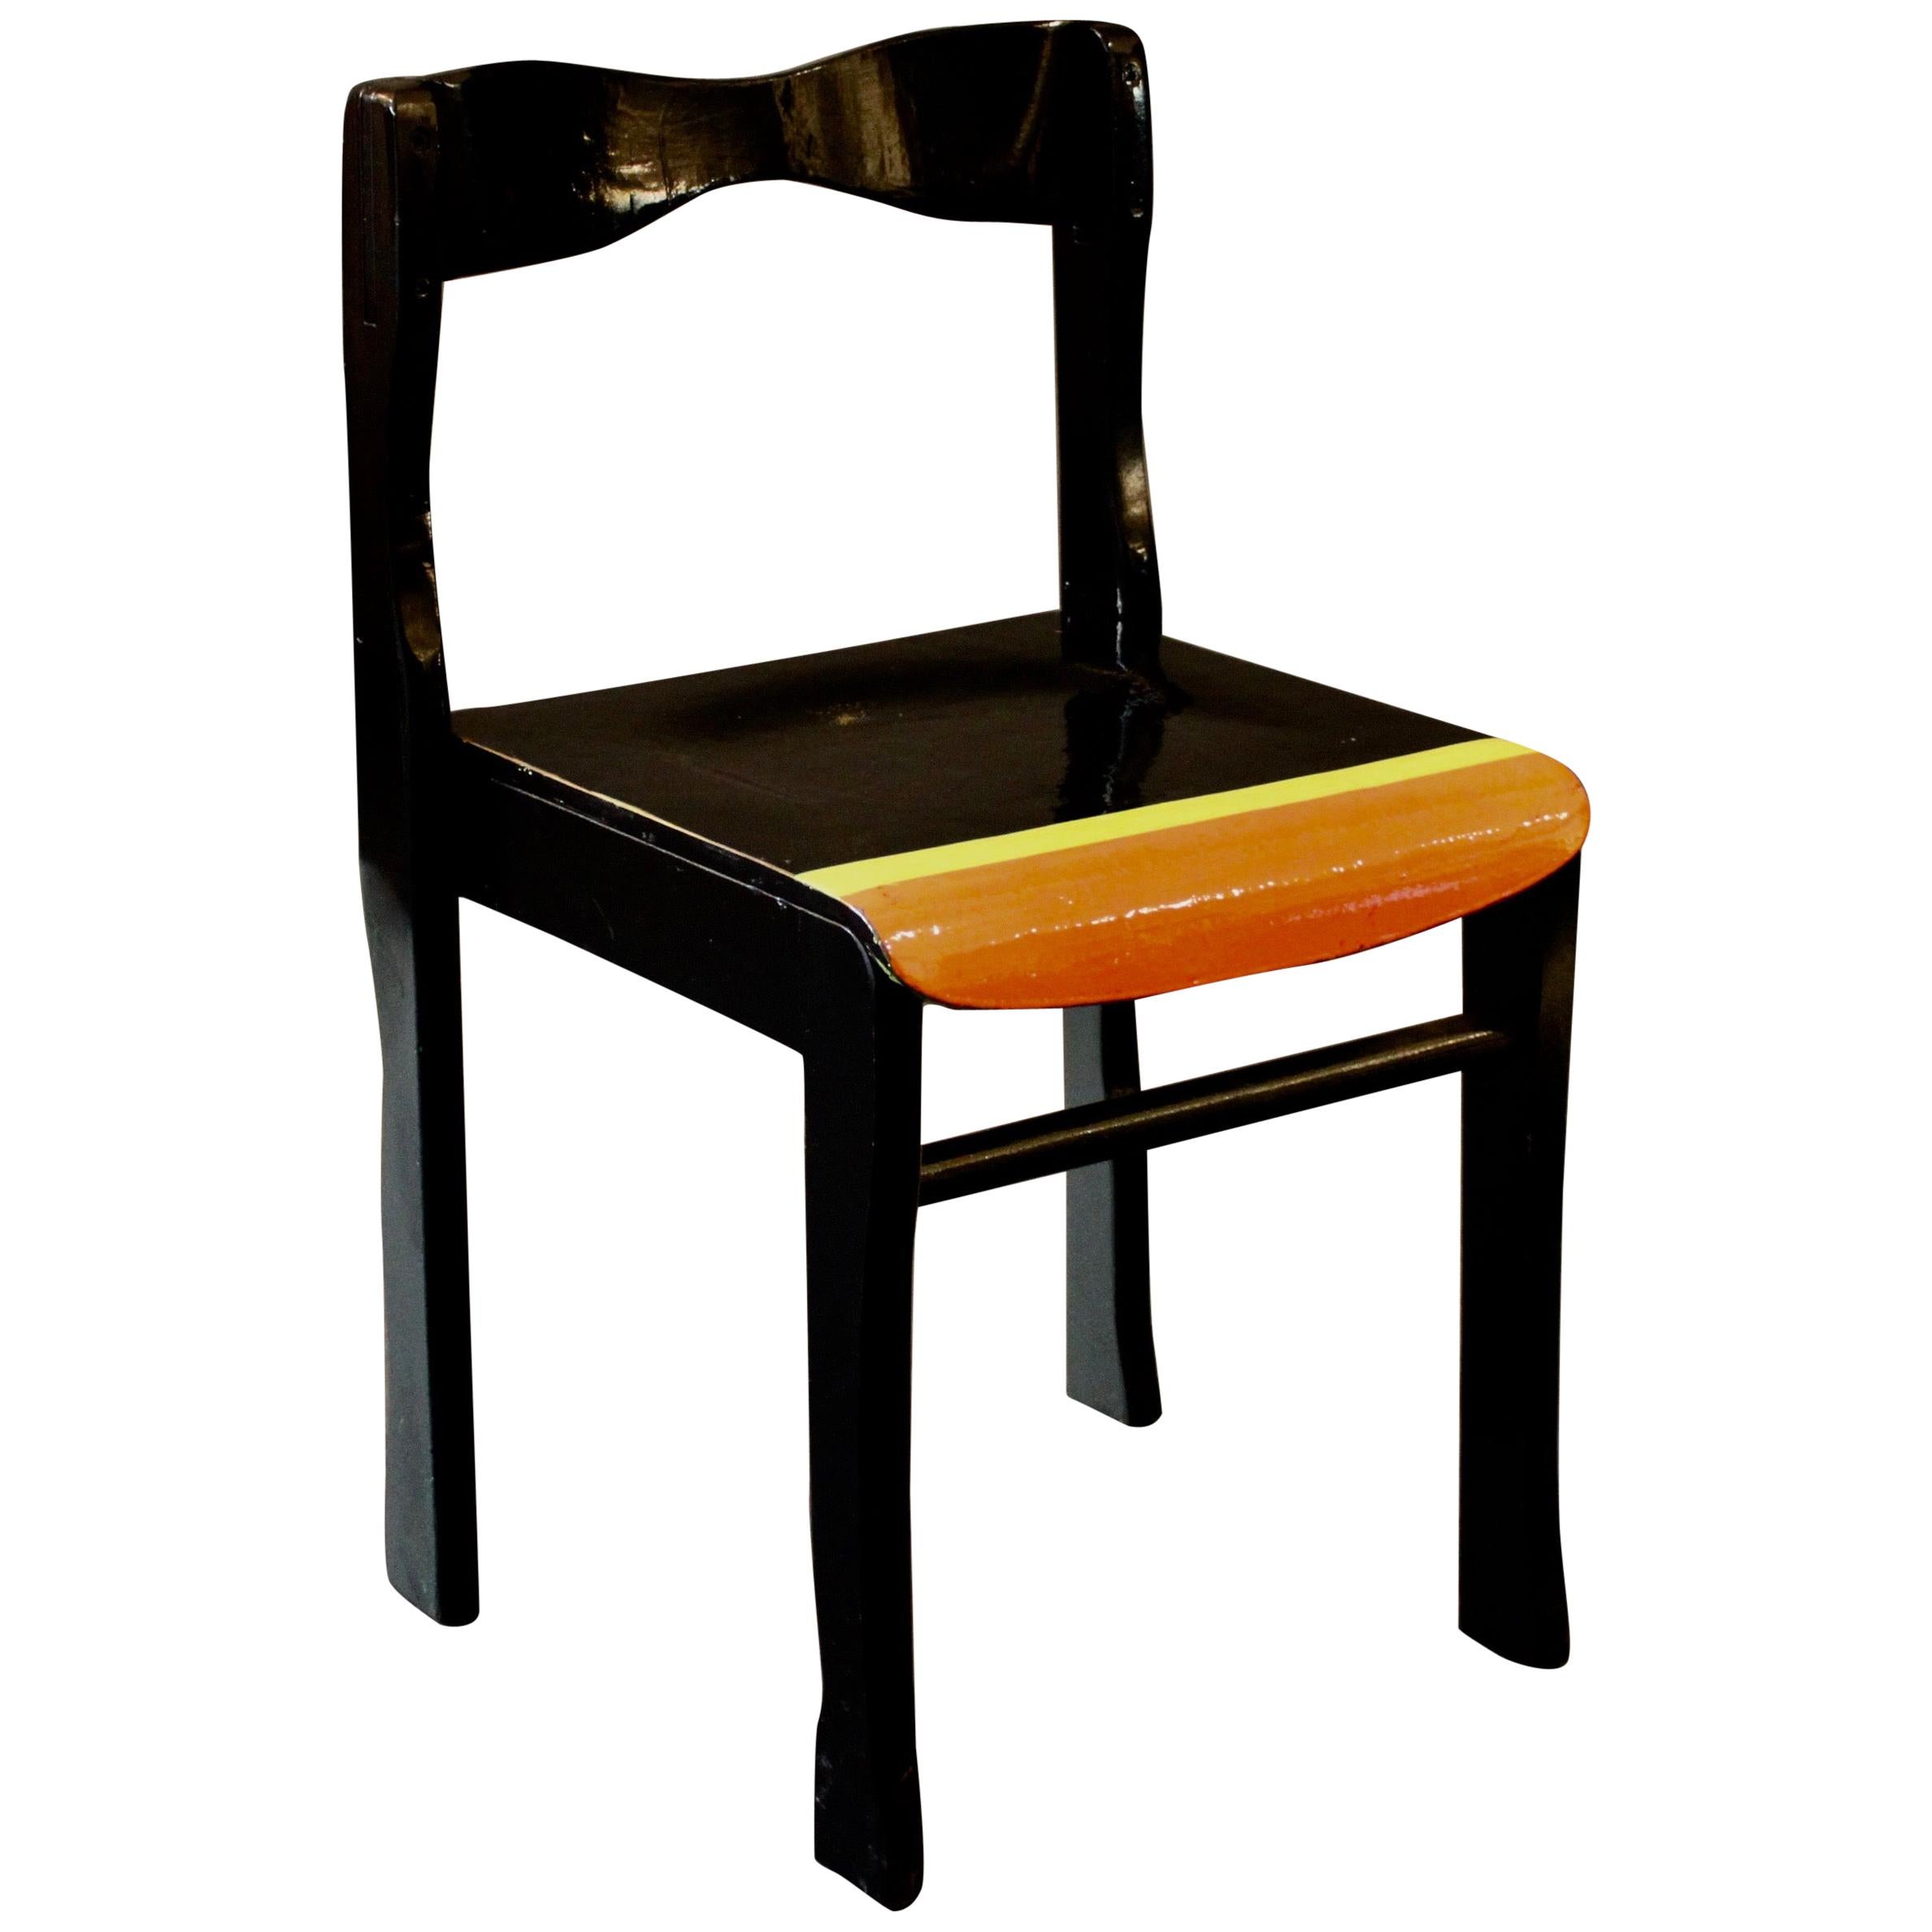 "Almost Black"  Functional Art Chair by German Artist Markus Friedrich Staab For Sale